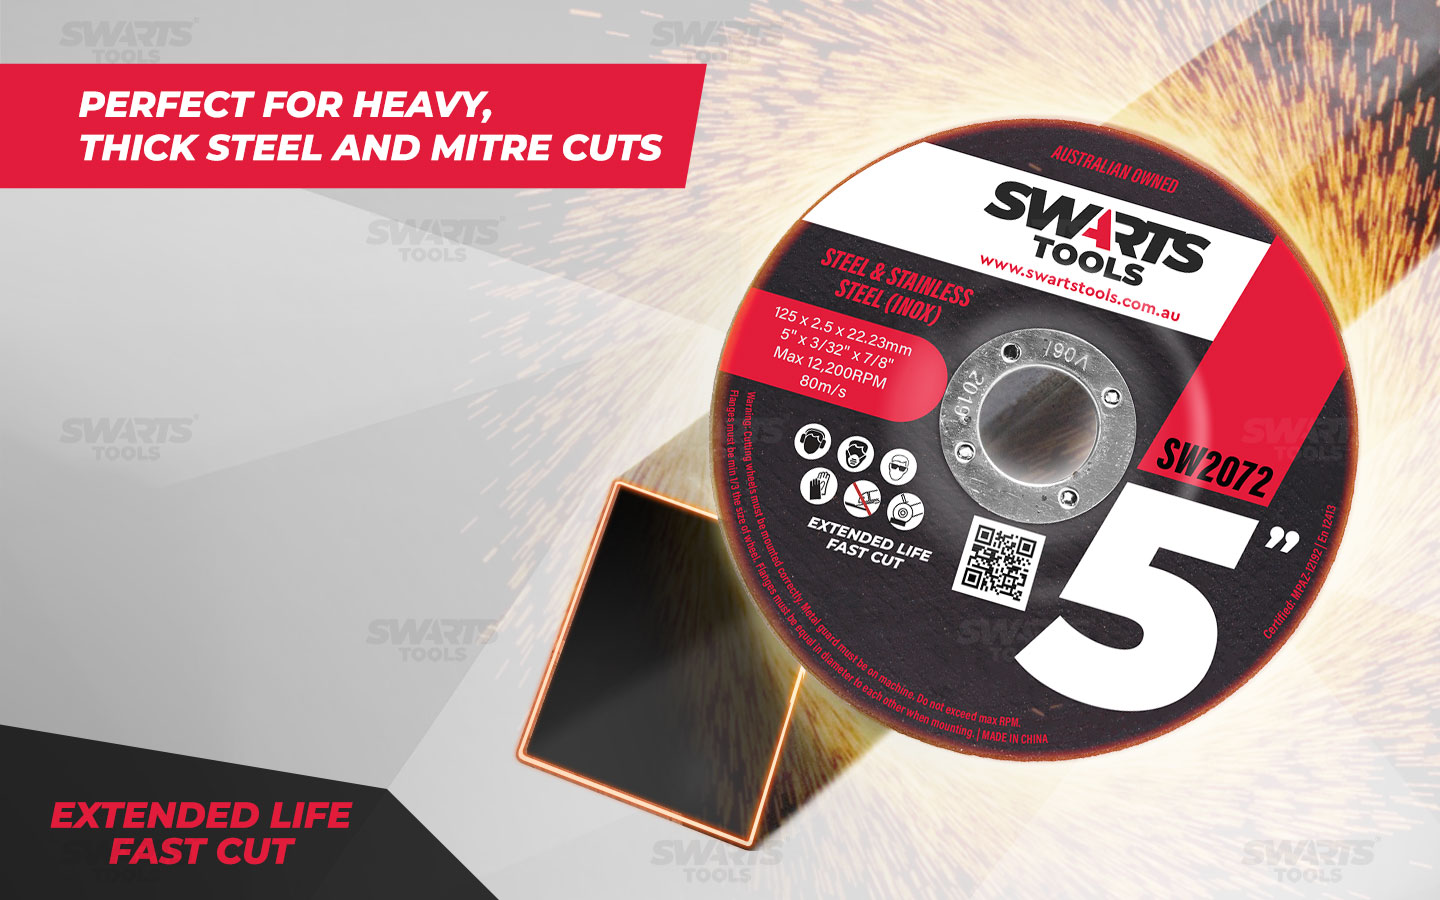 perfect for heavy, thick steel and mitre cuts